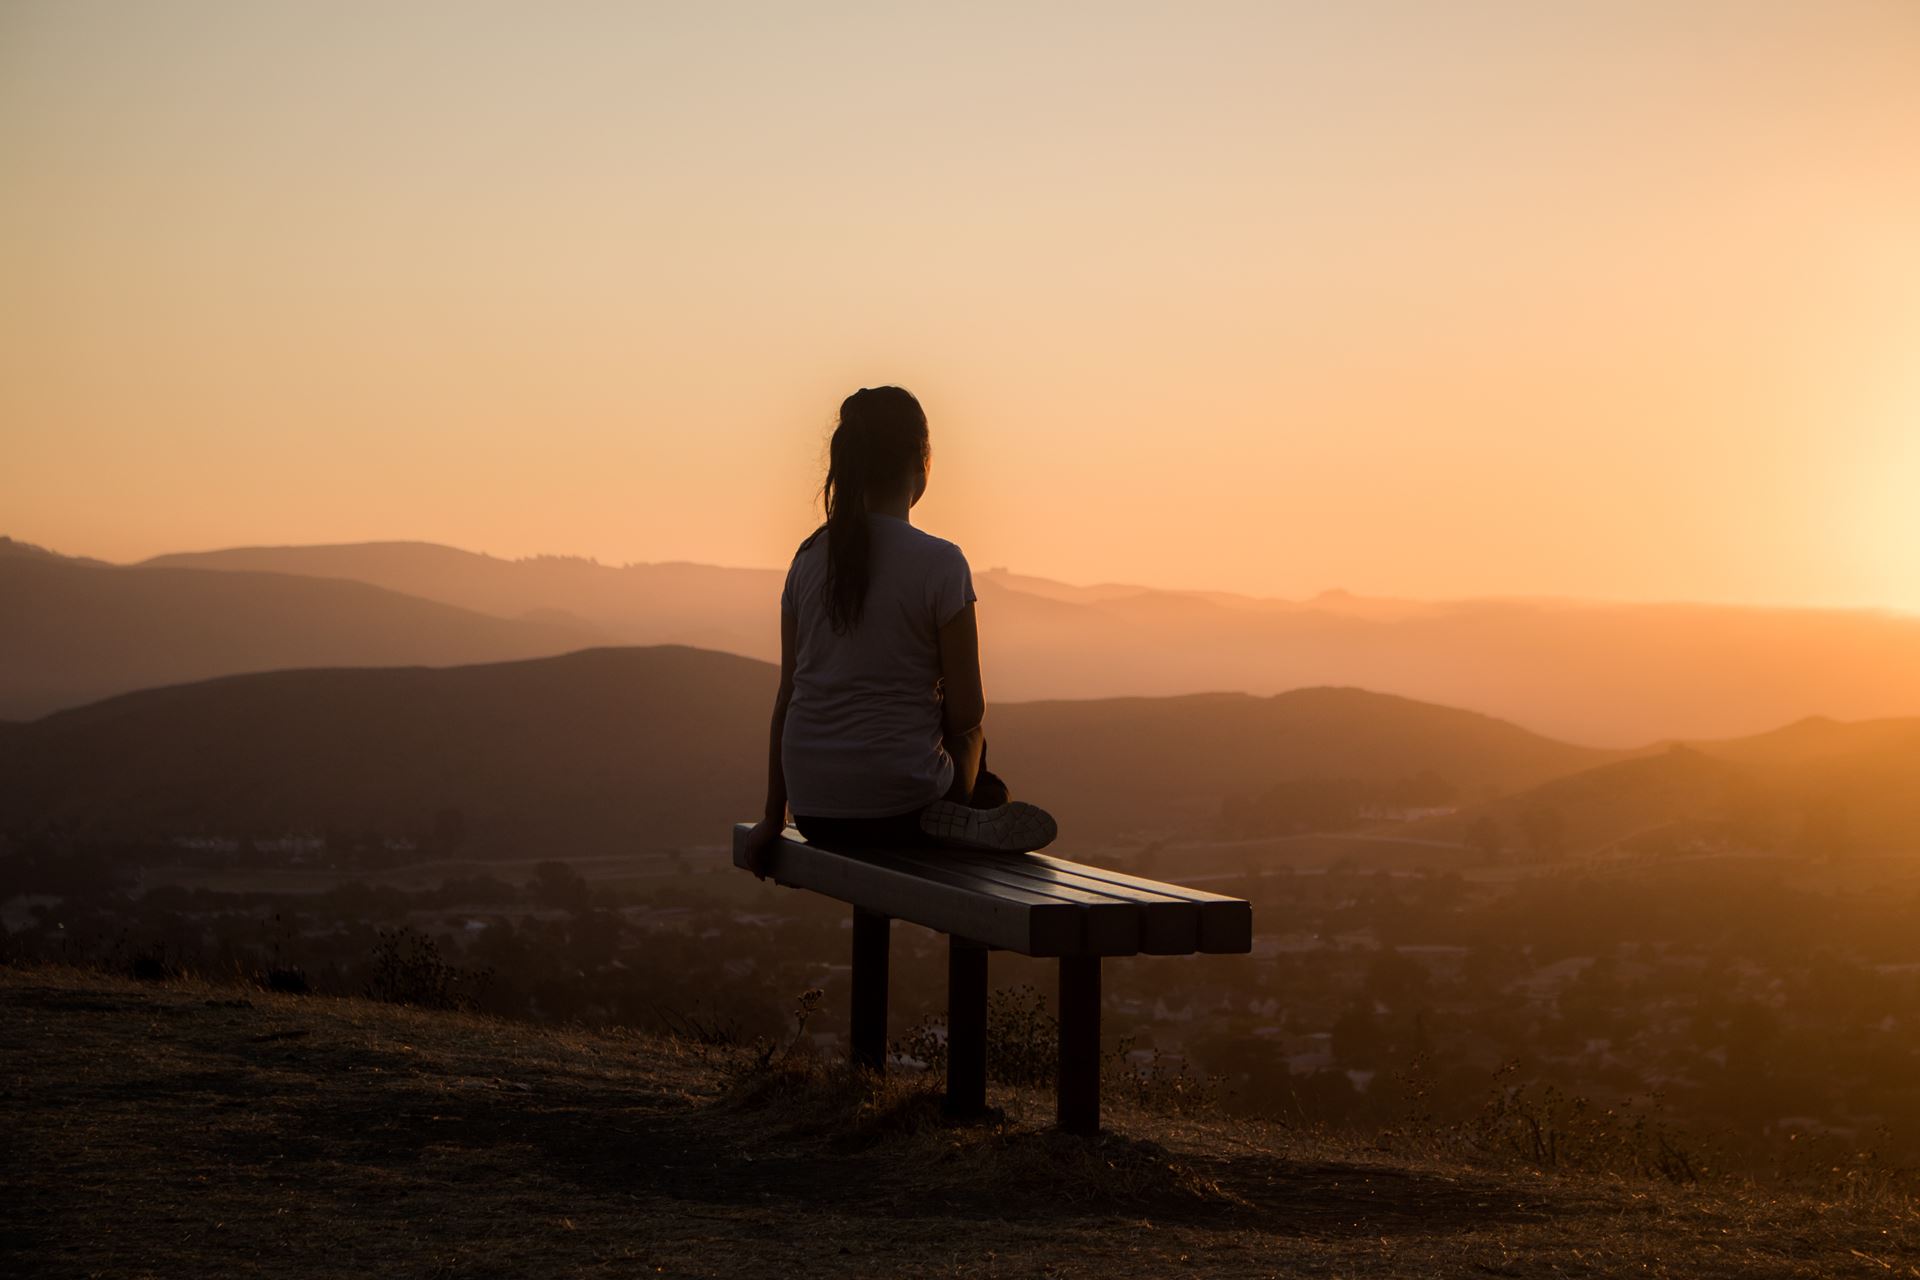 a person sitting on a bench in front of a sunset